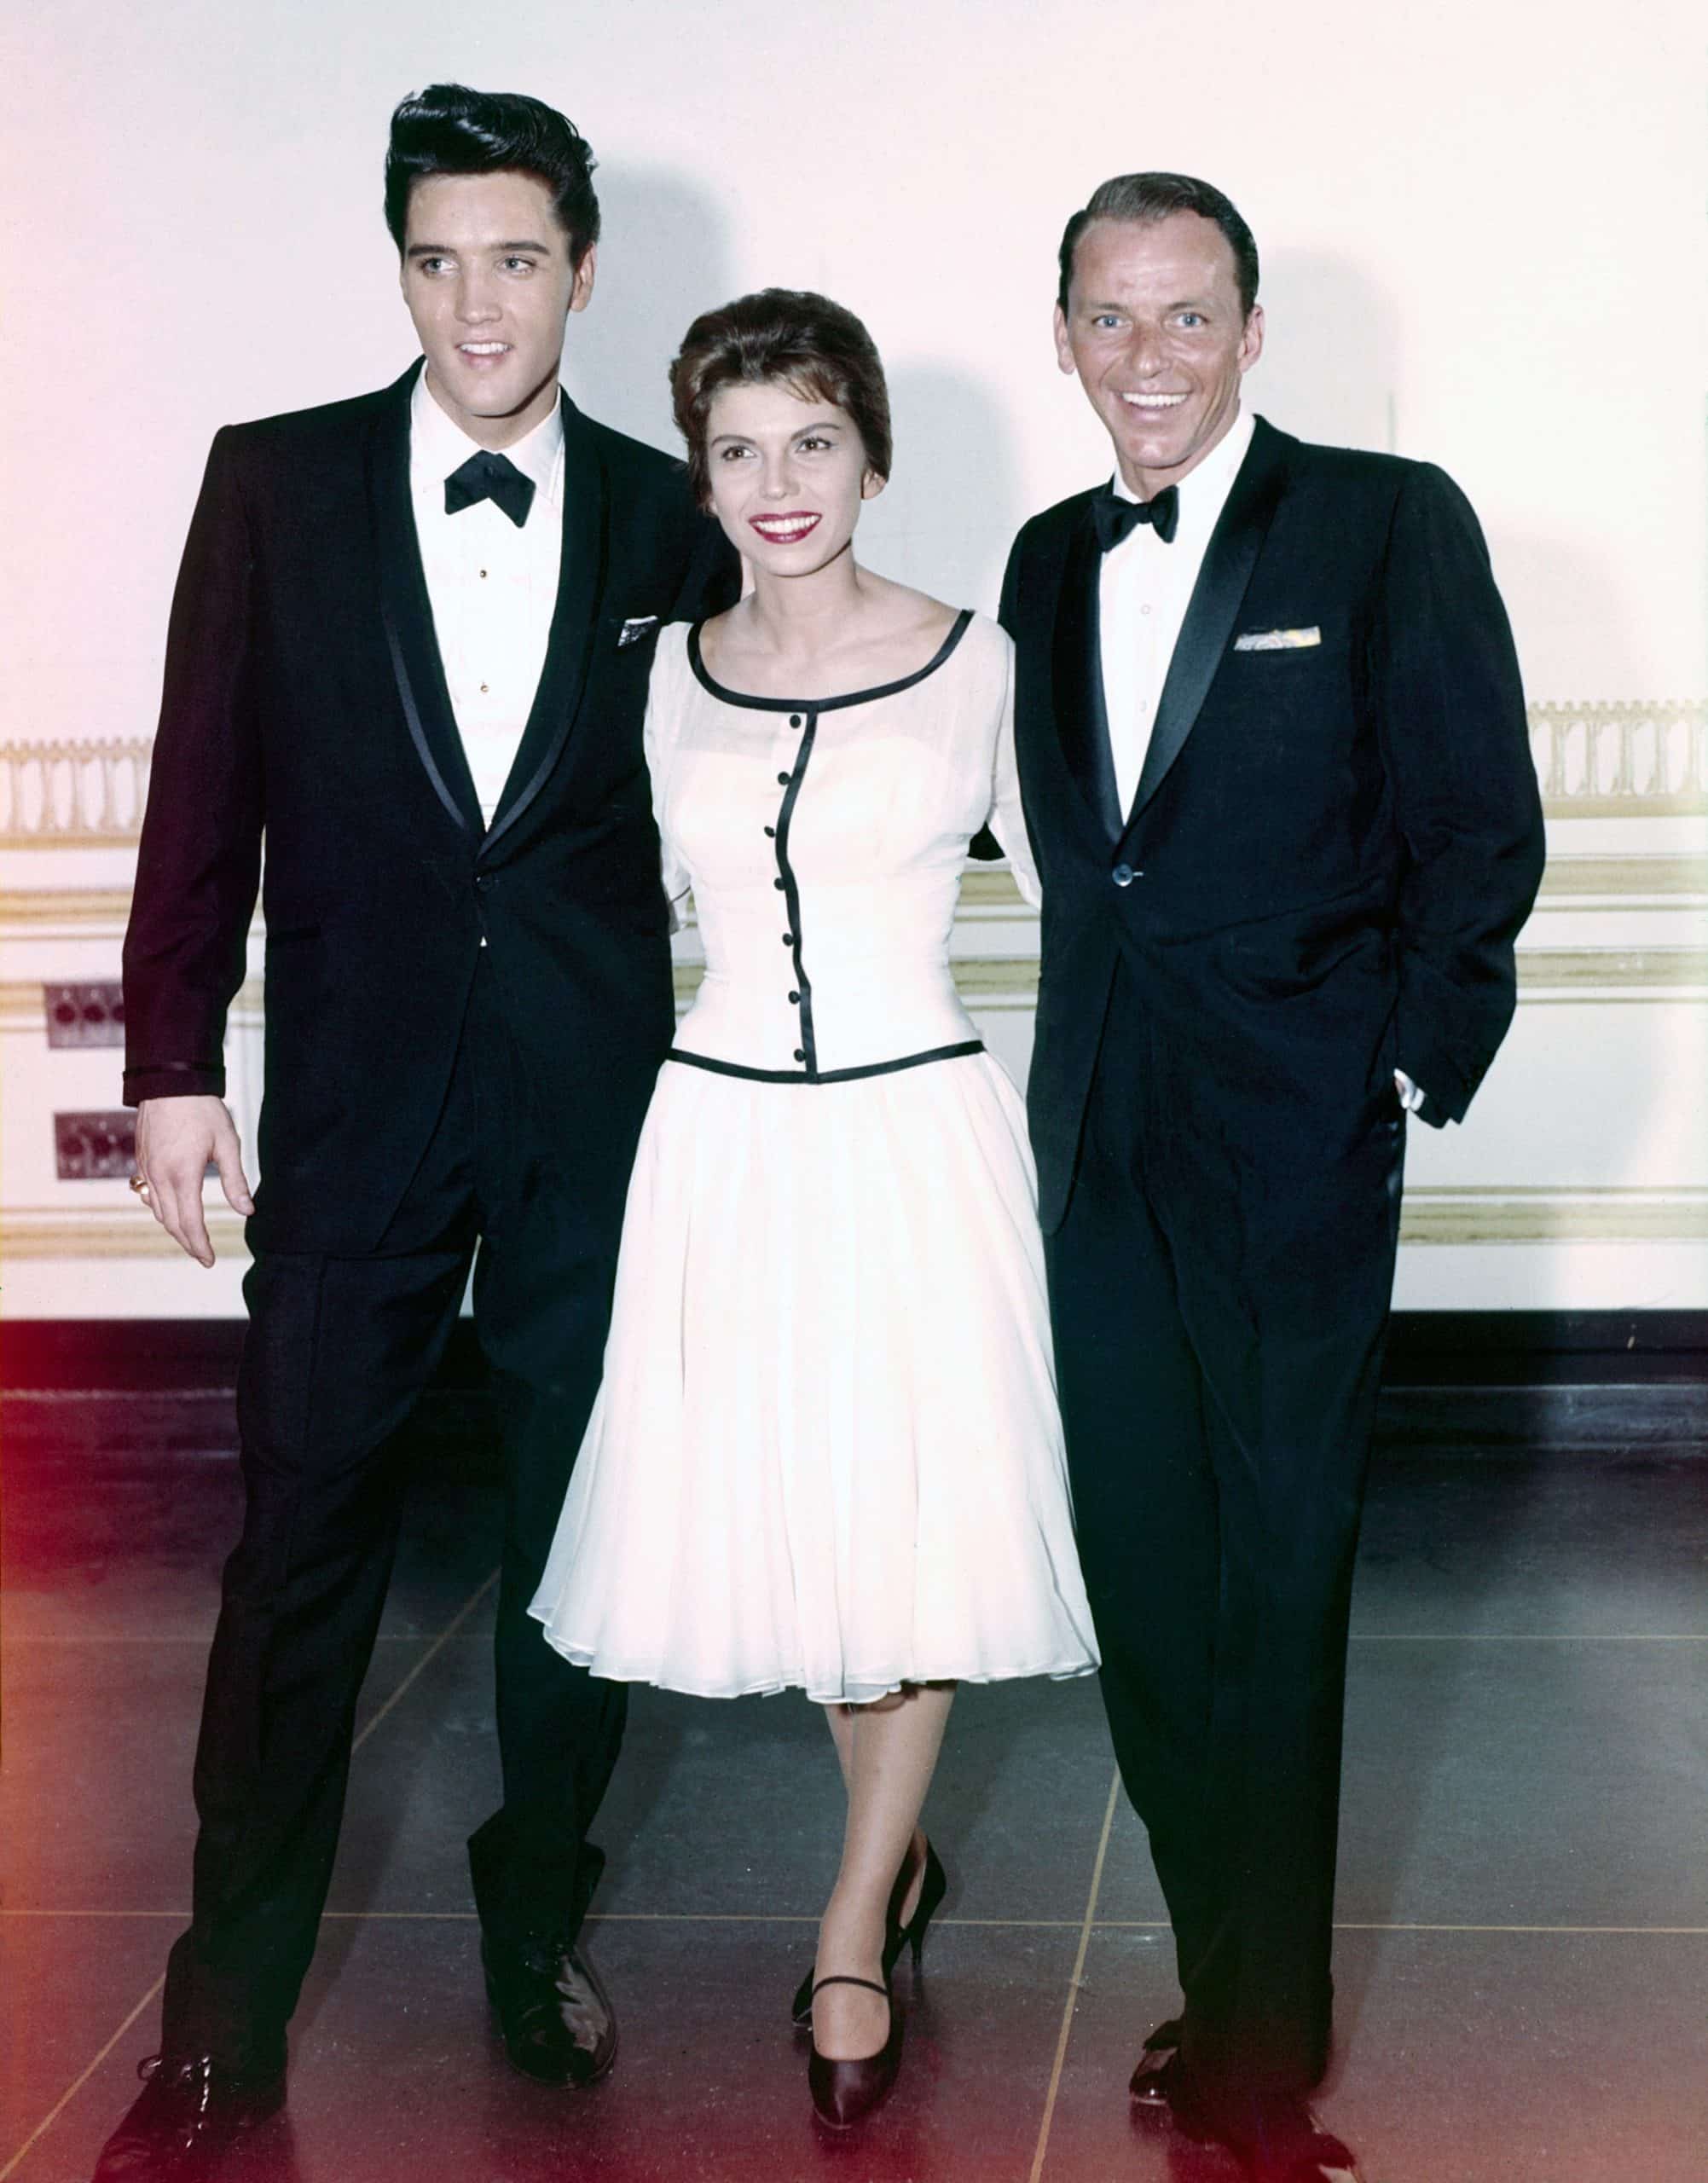 FRANK SINATRA'S WELCOME HOME PARTY FOR ELVIS PRESLEY, (aka THE FRANK SINATRA TIMEX SHOW: WELCOME HOME ELVIS), from left: Elvis Presley, Nancy Sinatra, Frank Sinatra